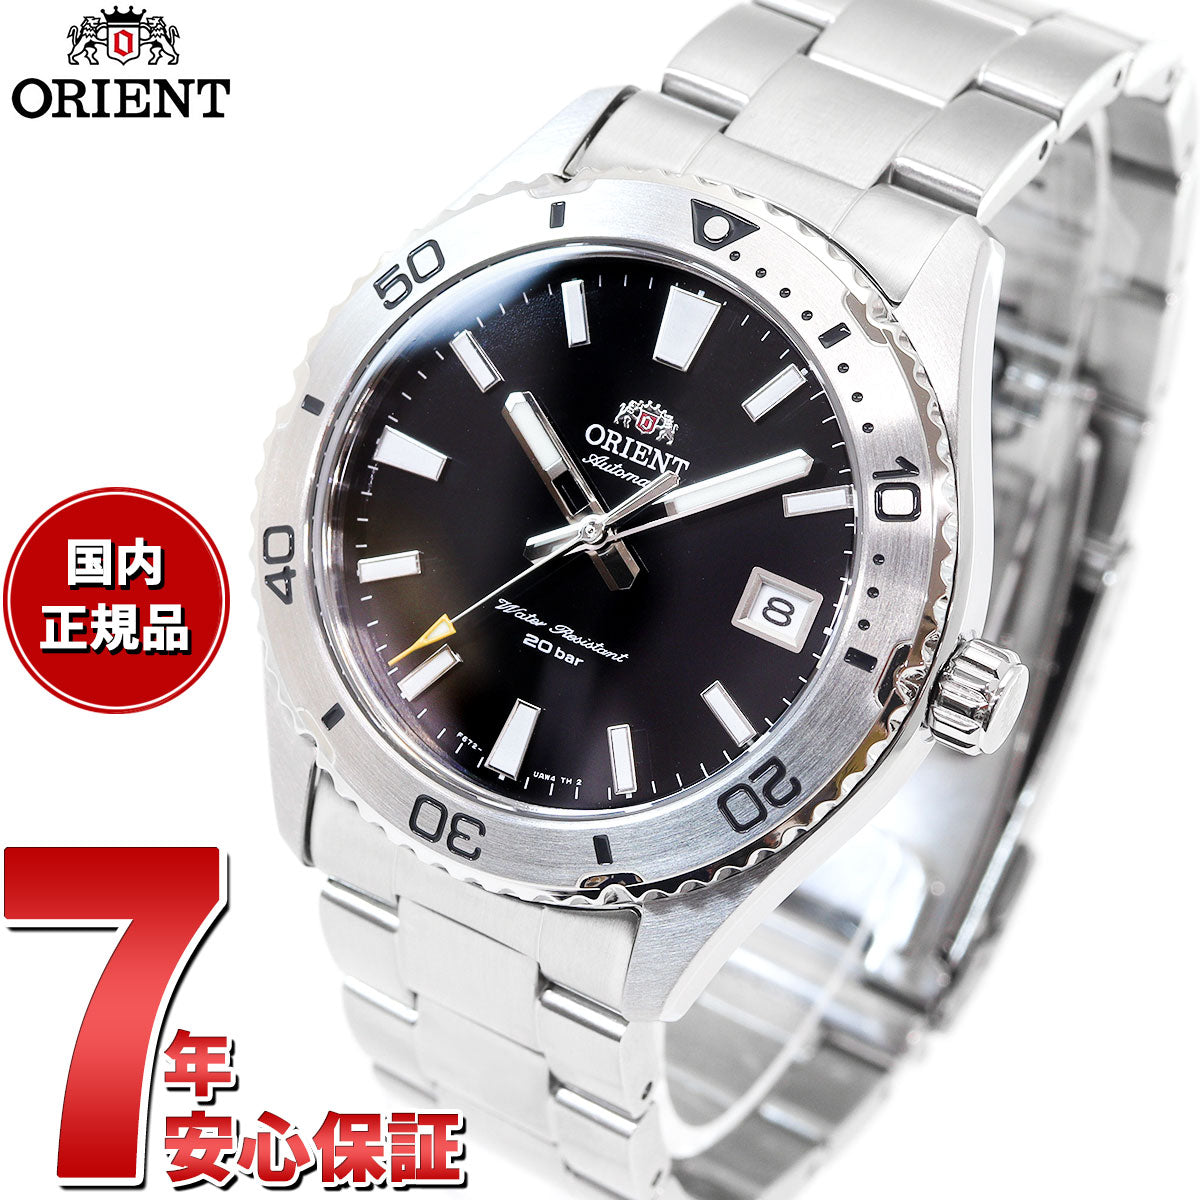 Orient new mako 39mm文字盤は何色でしょうか